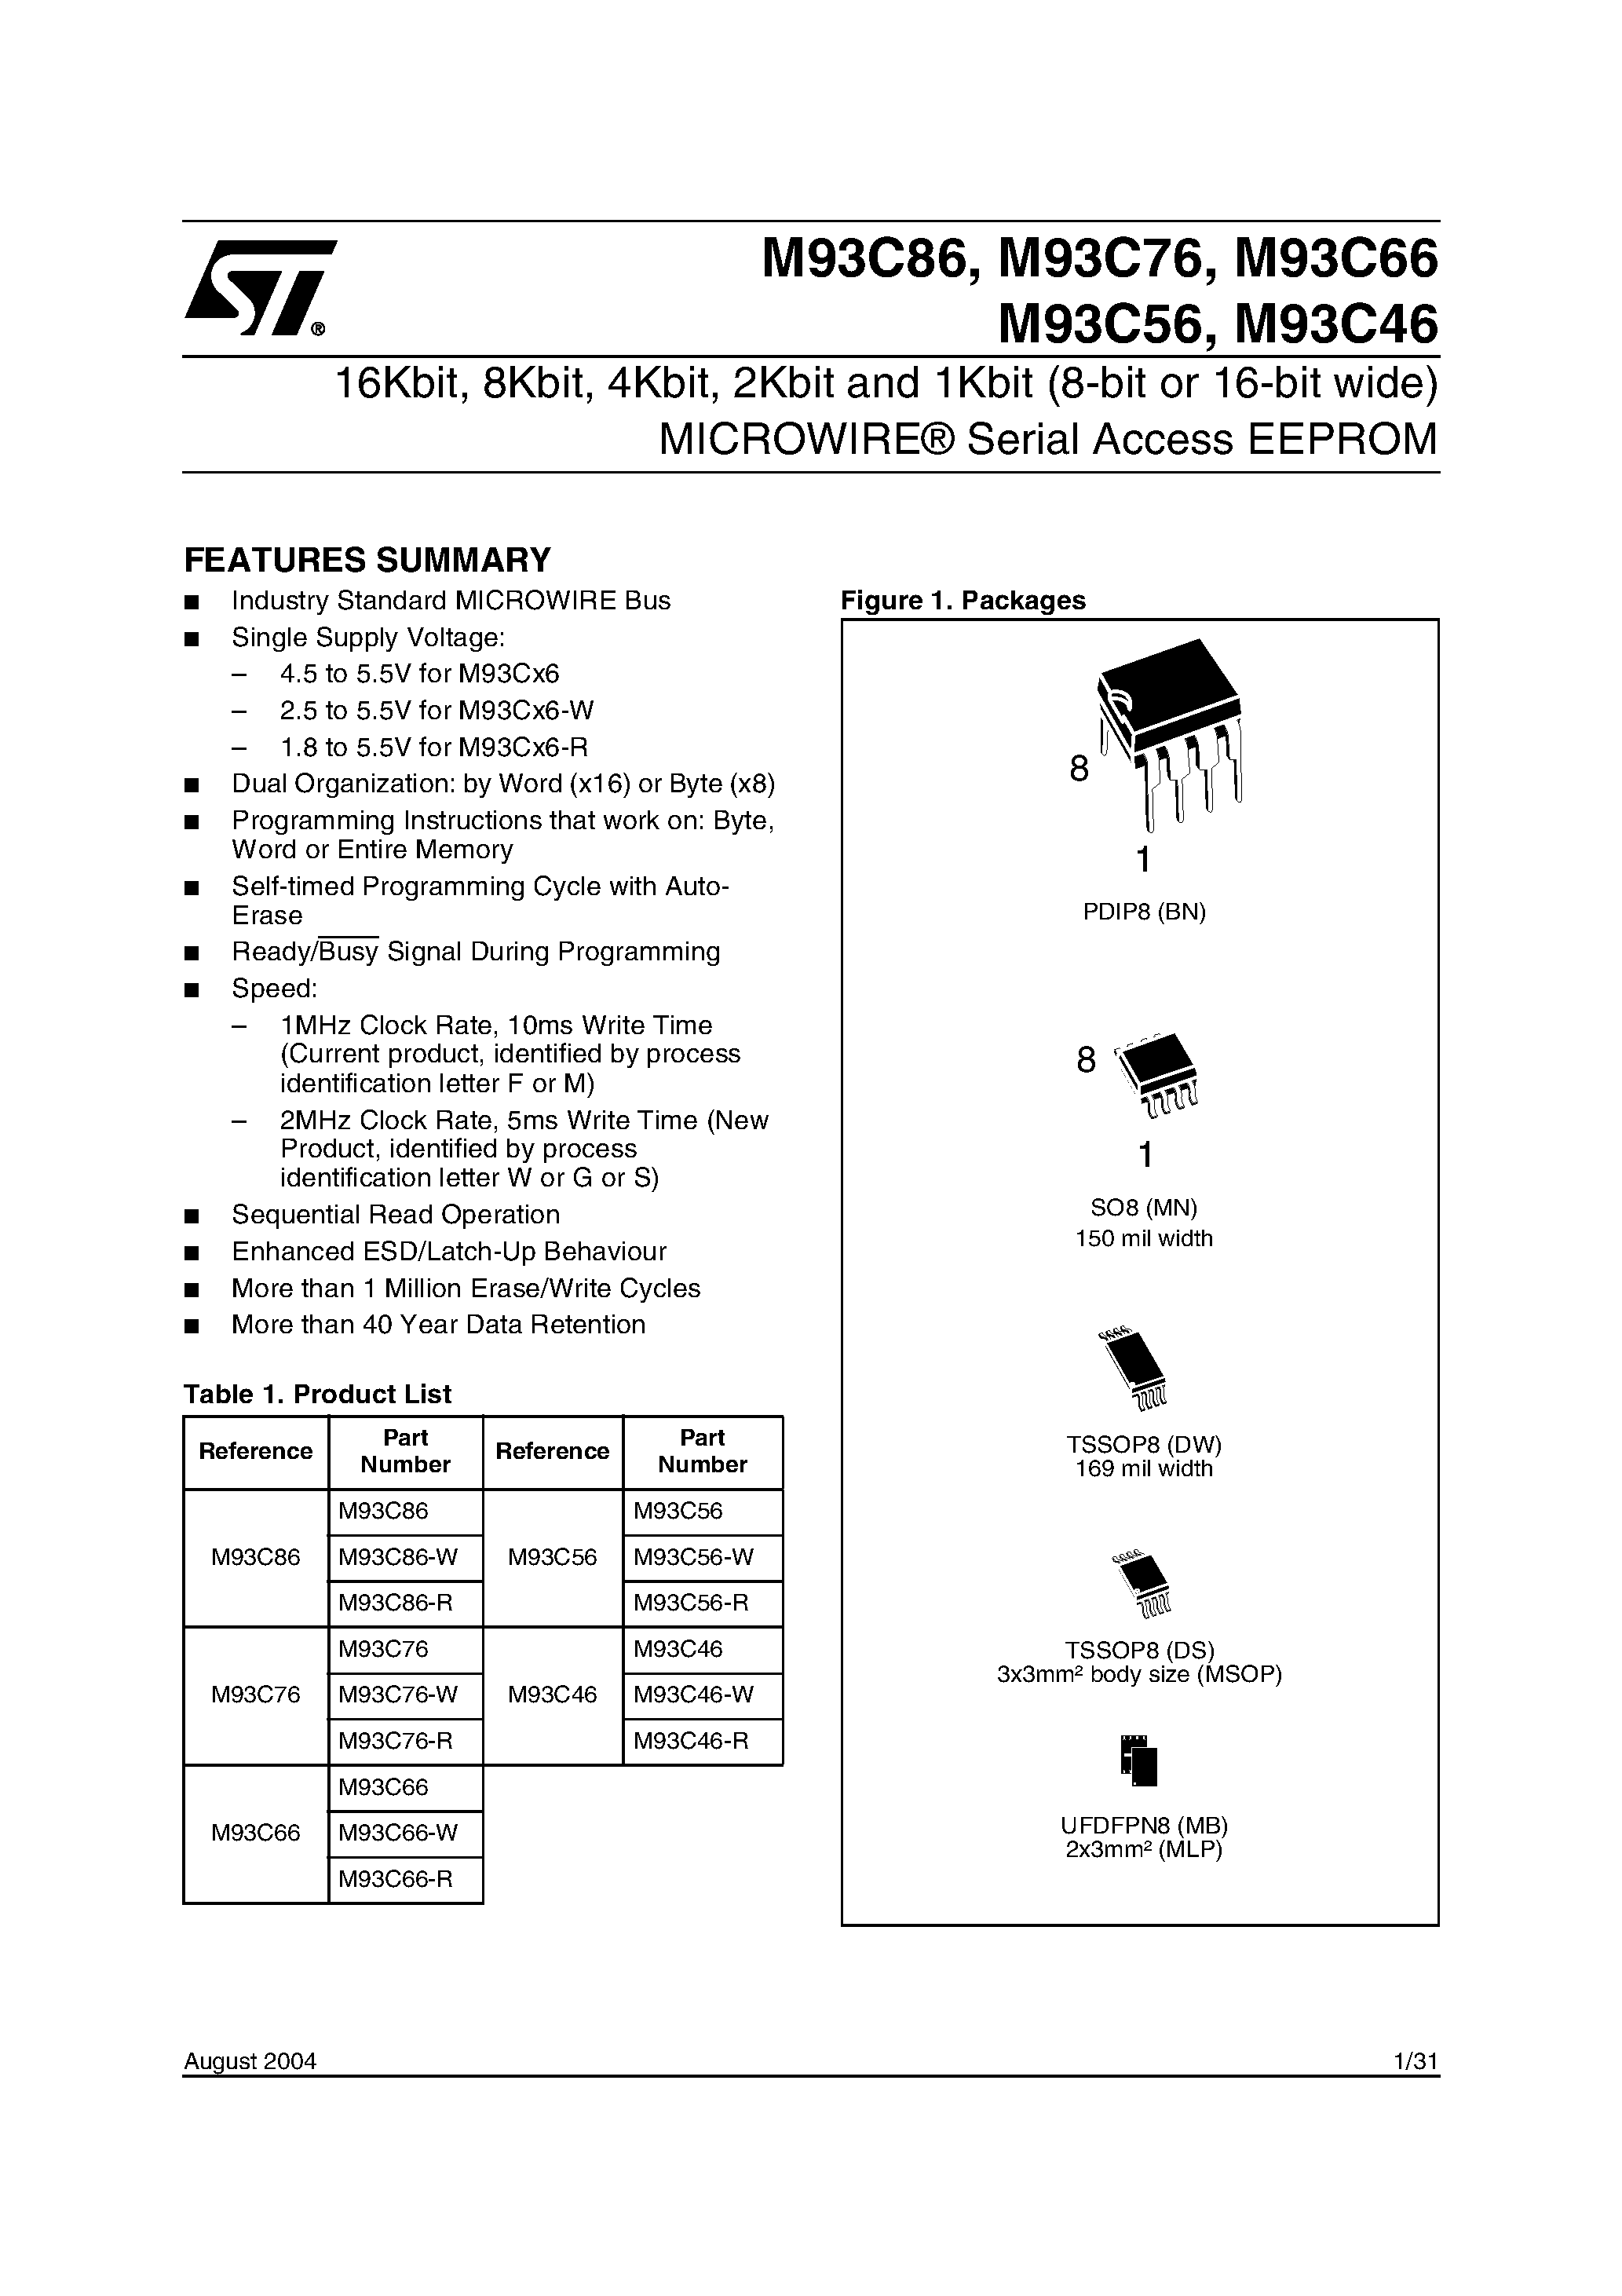 Datasheet M93C56 - 16Kbit / 8Kbit / 4Kbit / 2Kbit / 1Kbit and 256bit 8-bit or 16-bit wide page 1